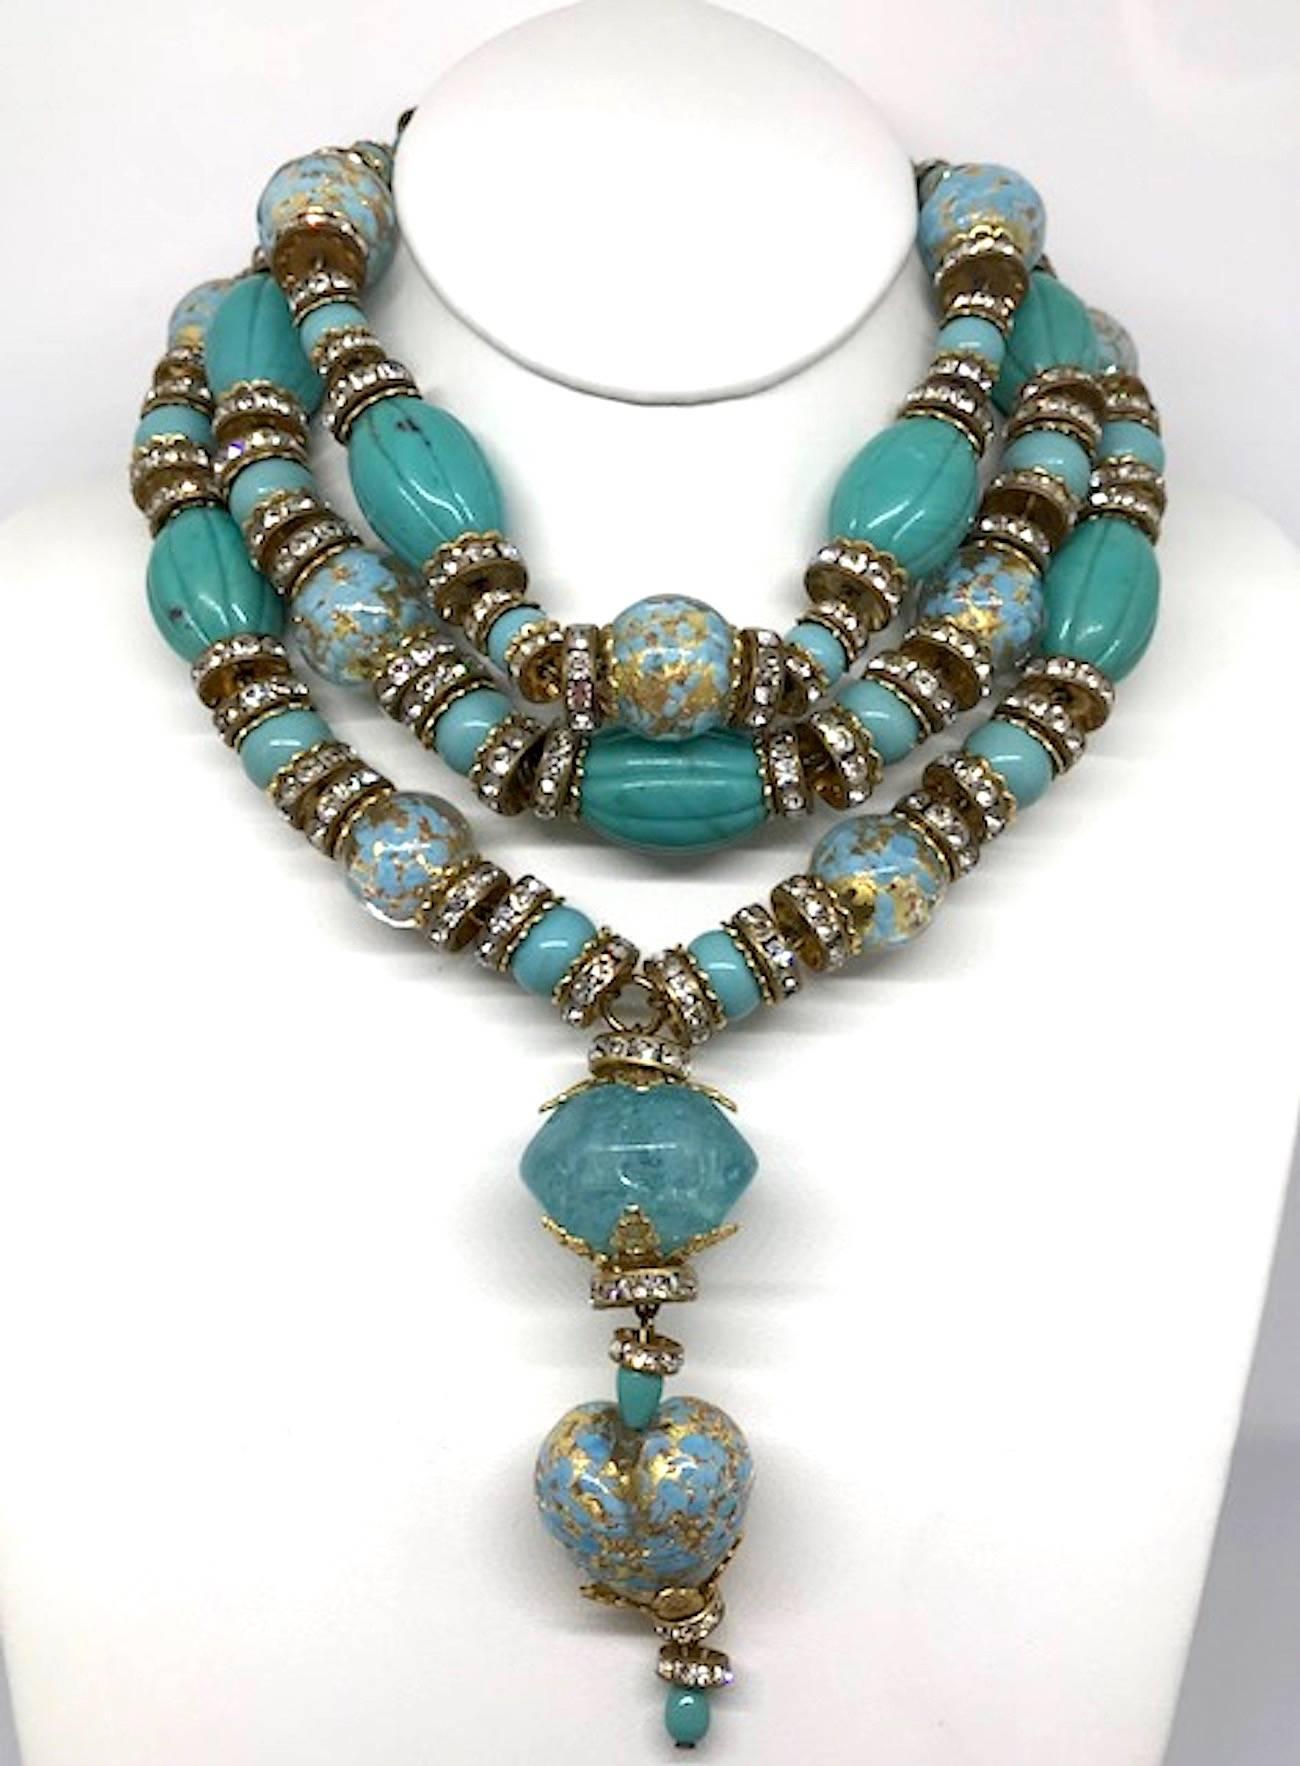 Venetian glass bead necklace from actress Elsa Martinelli's personal collection 4